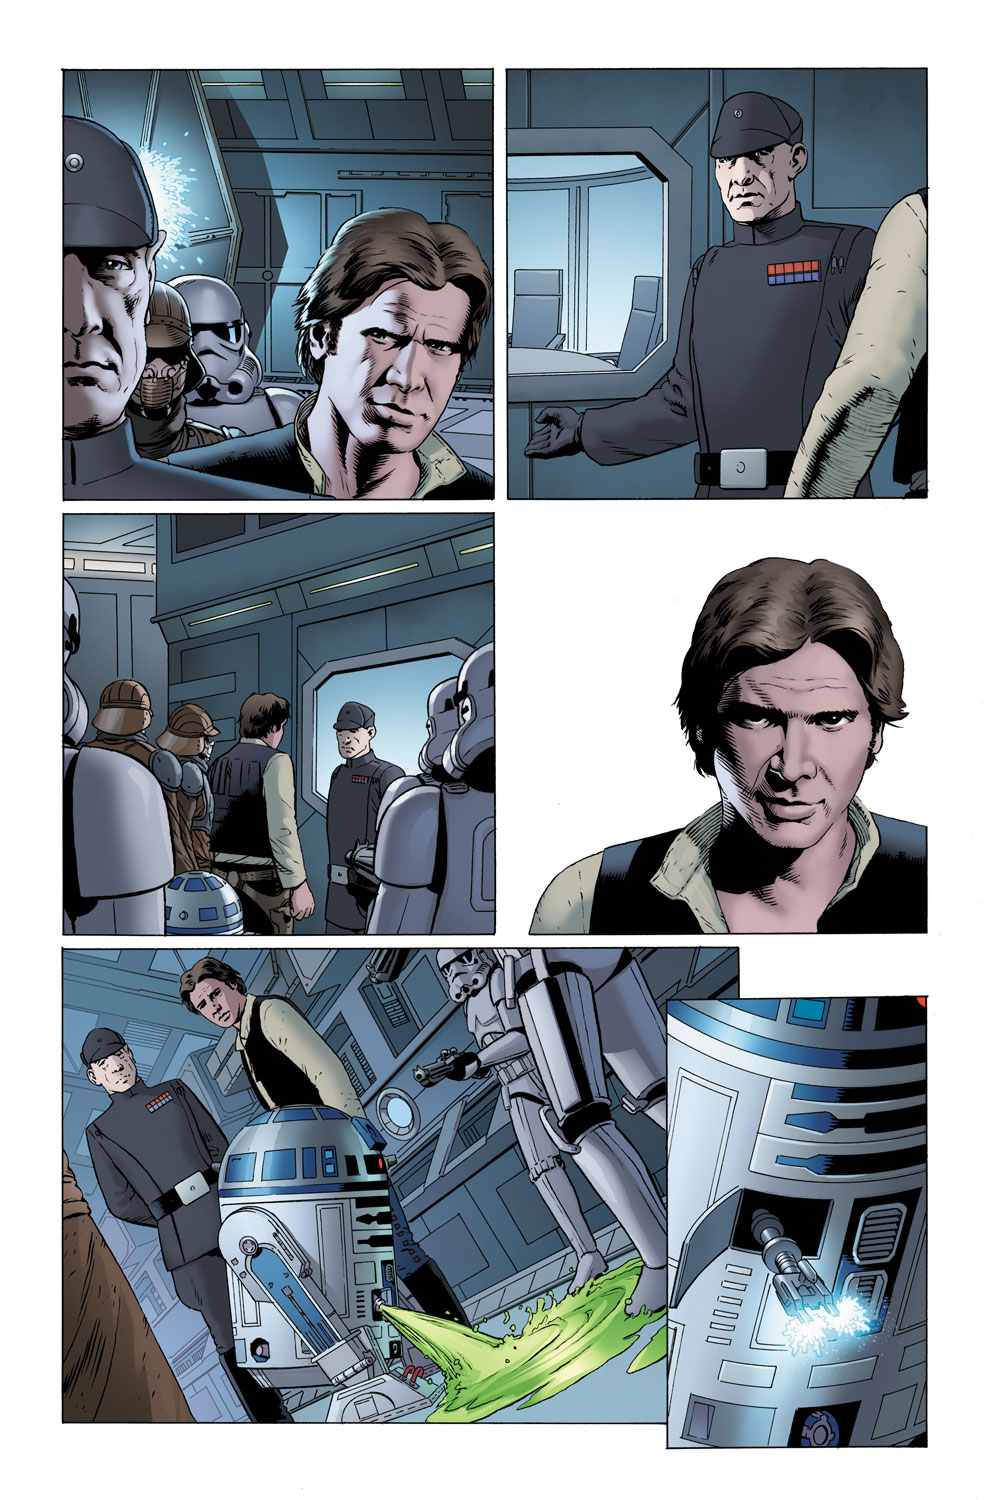 Star Wars Comics Are Getting Better